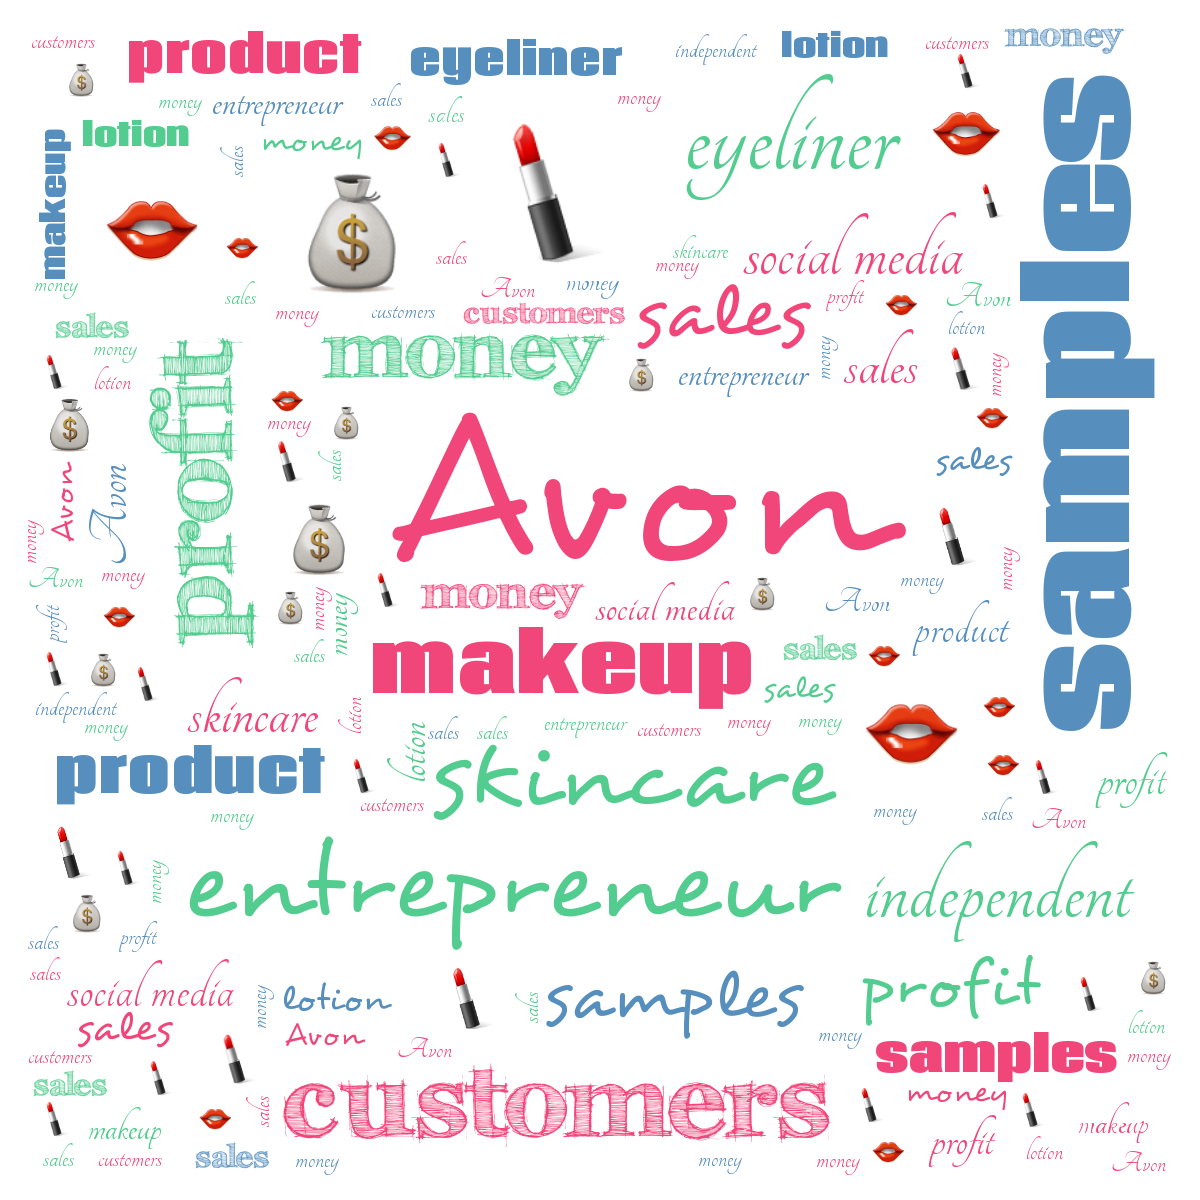 Tag: Can I Sell Avon and Mary Kay at the Same Time